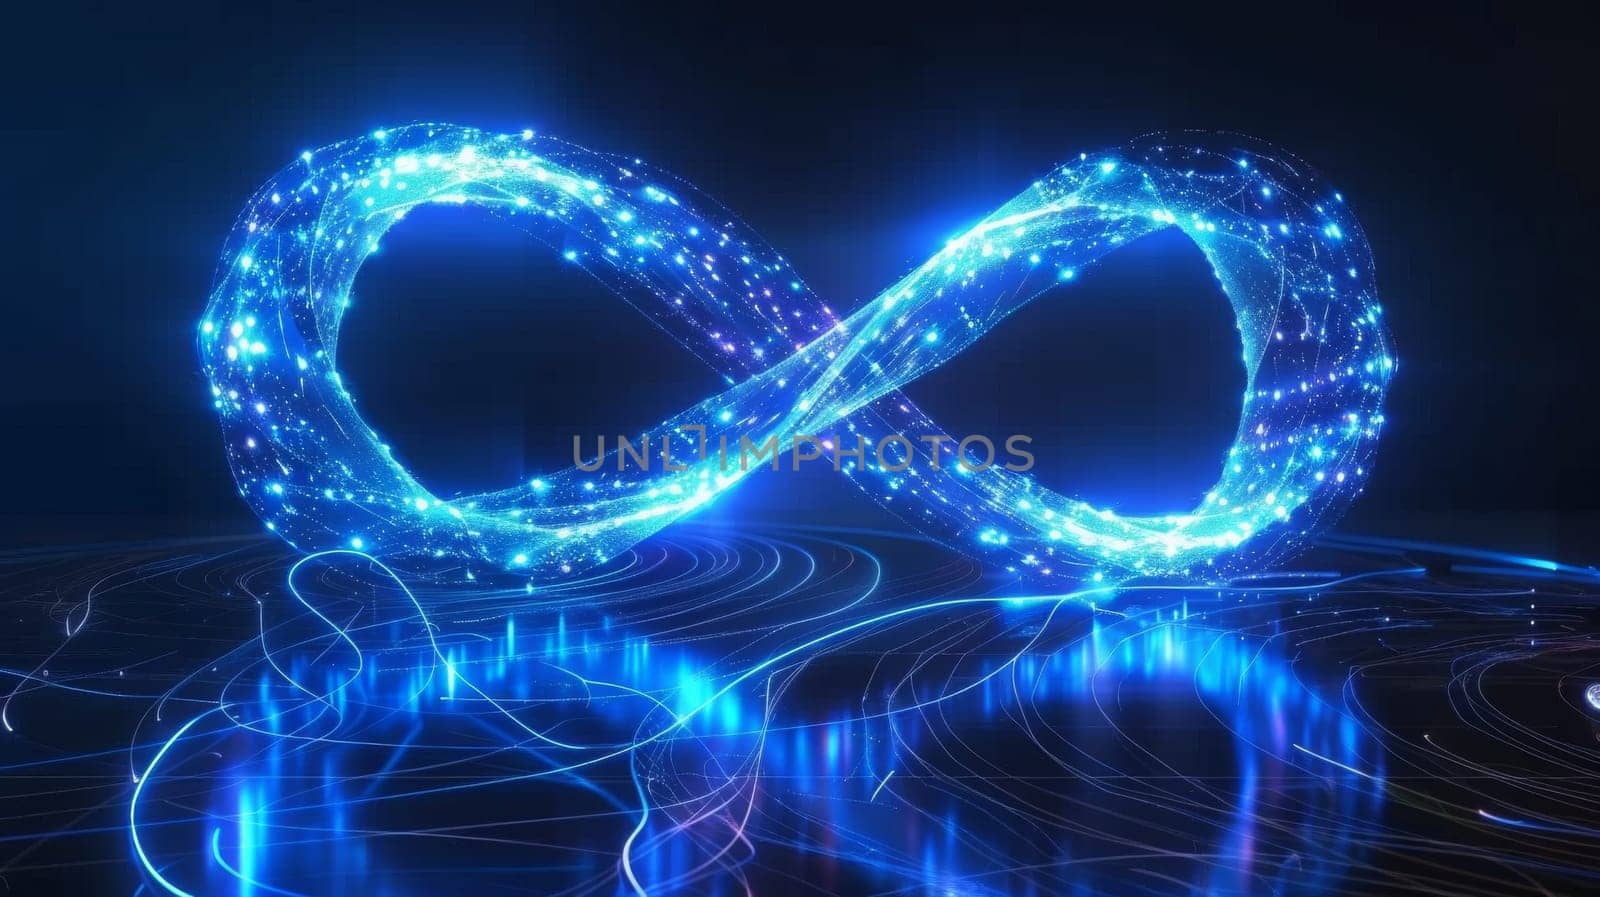 A blue and neon shaped infinity symbol by itchaznong